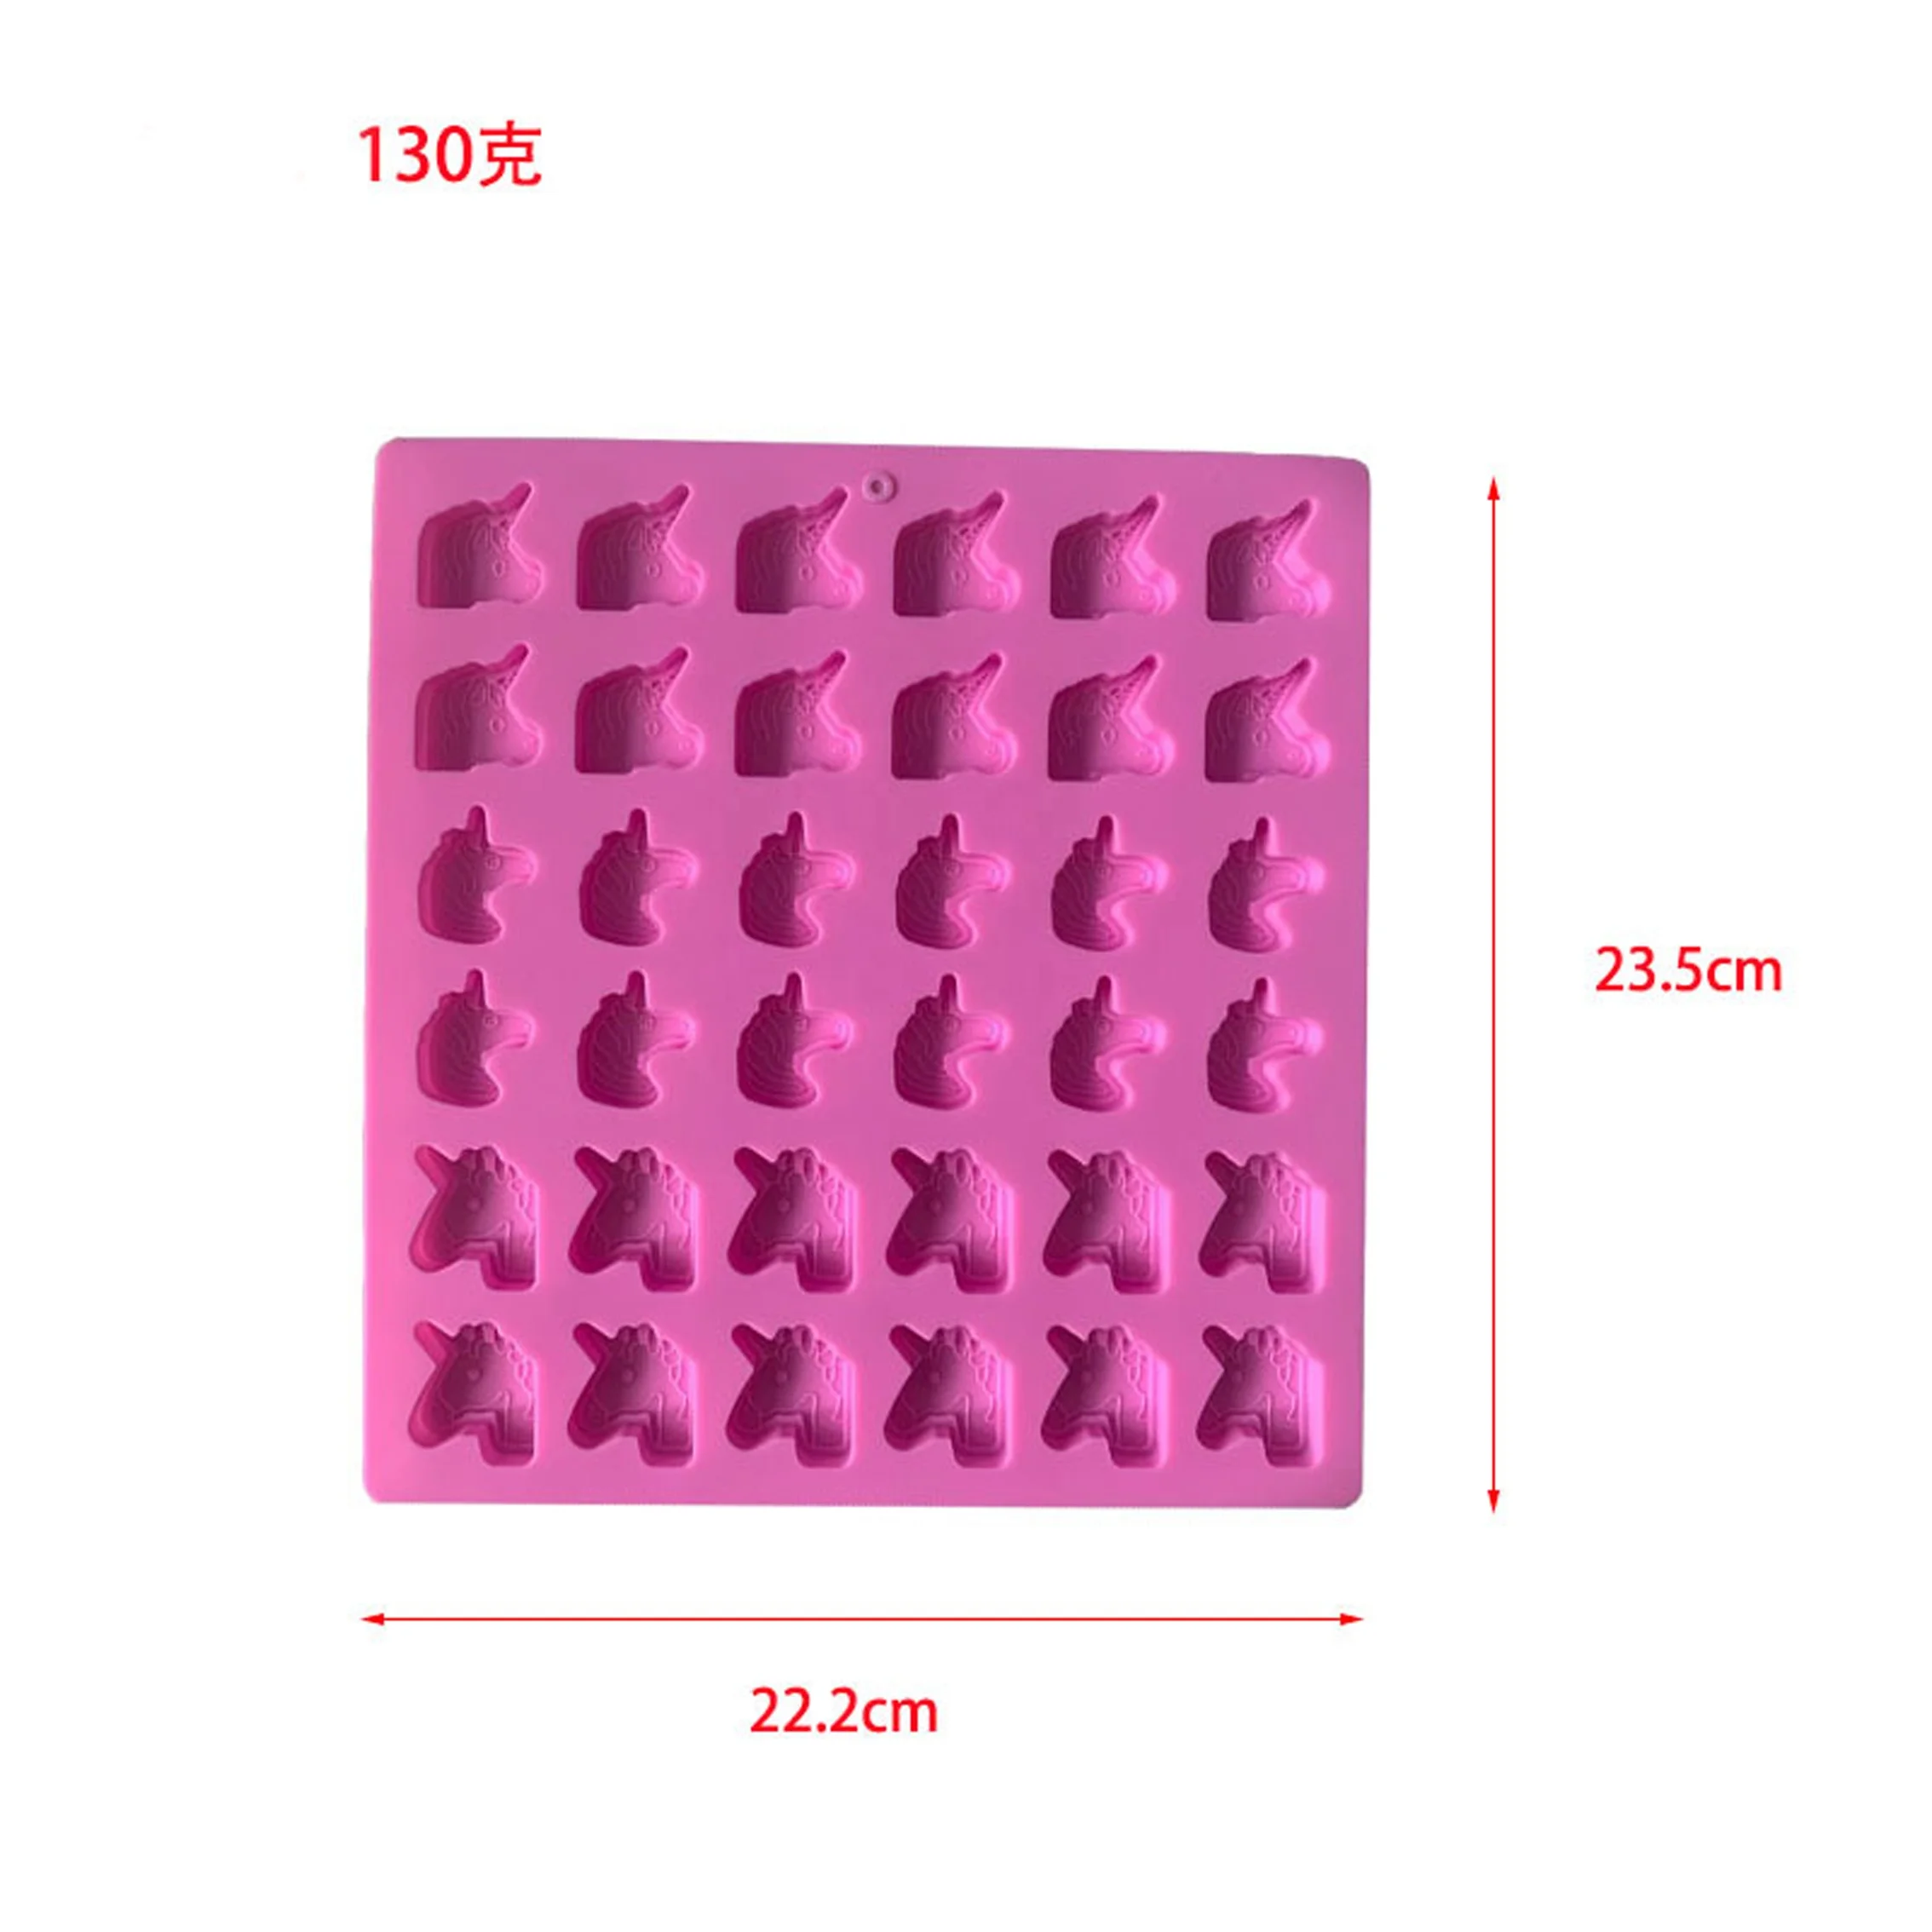 hot selling 36 Cavity Unicorn Shaped Chocolate Mold non stick easy to clean Ice Cube Mold Cake Mold Flower Cake Tools